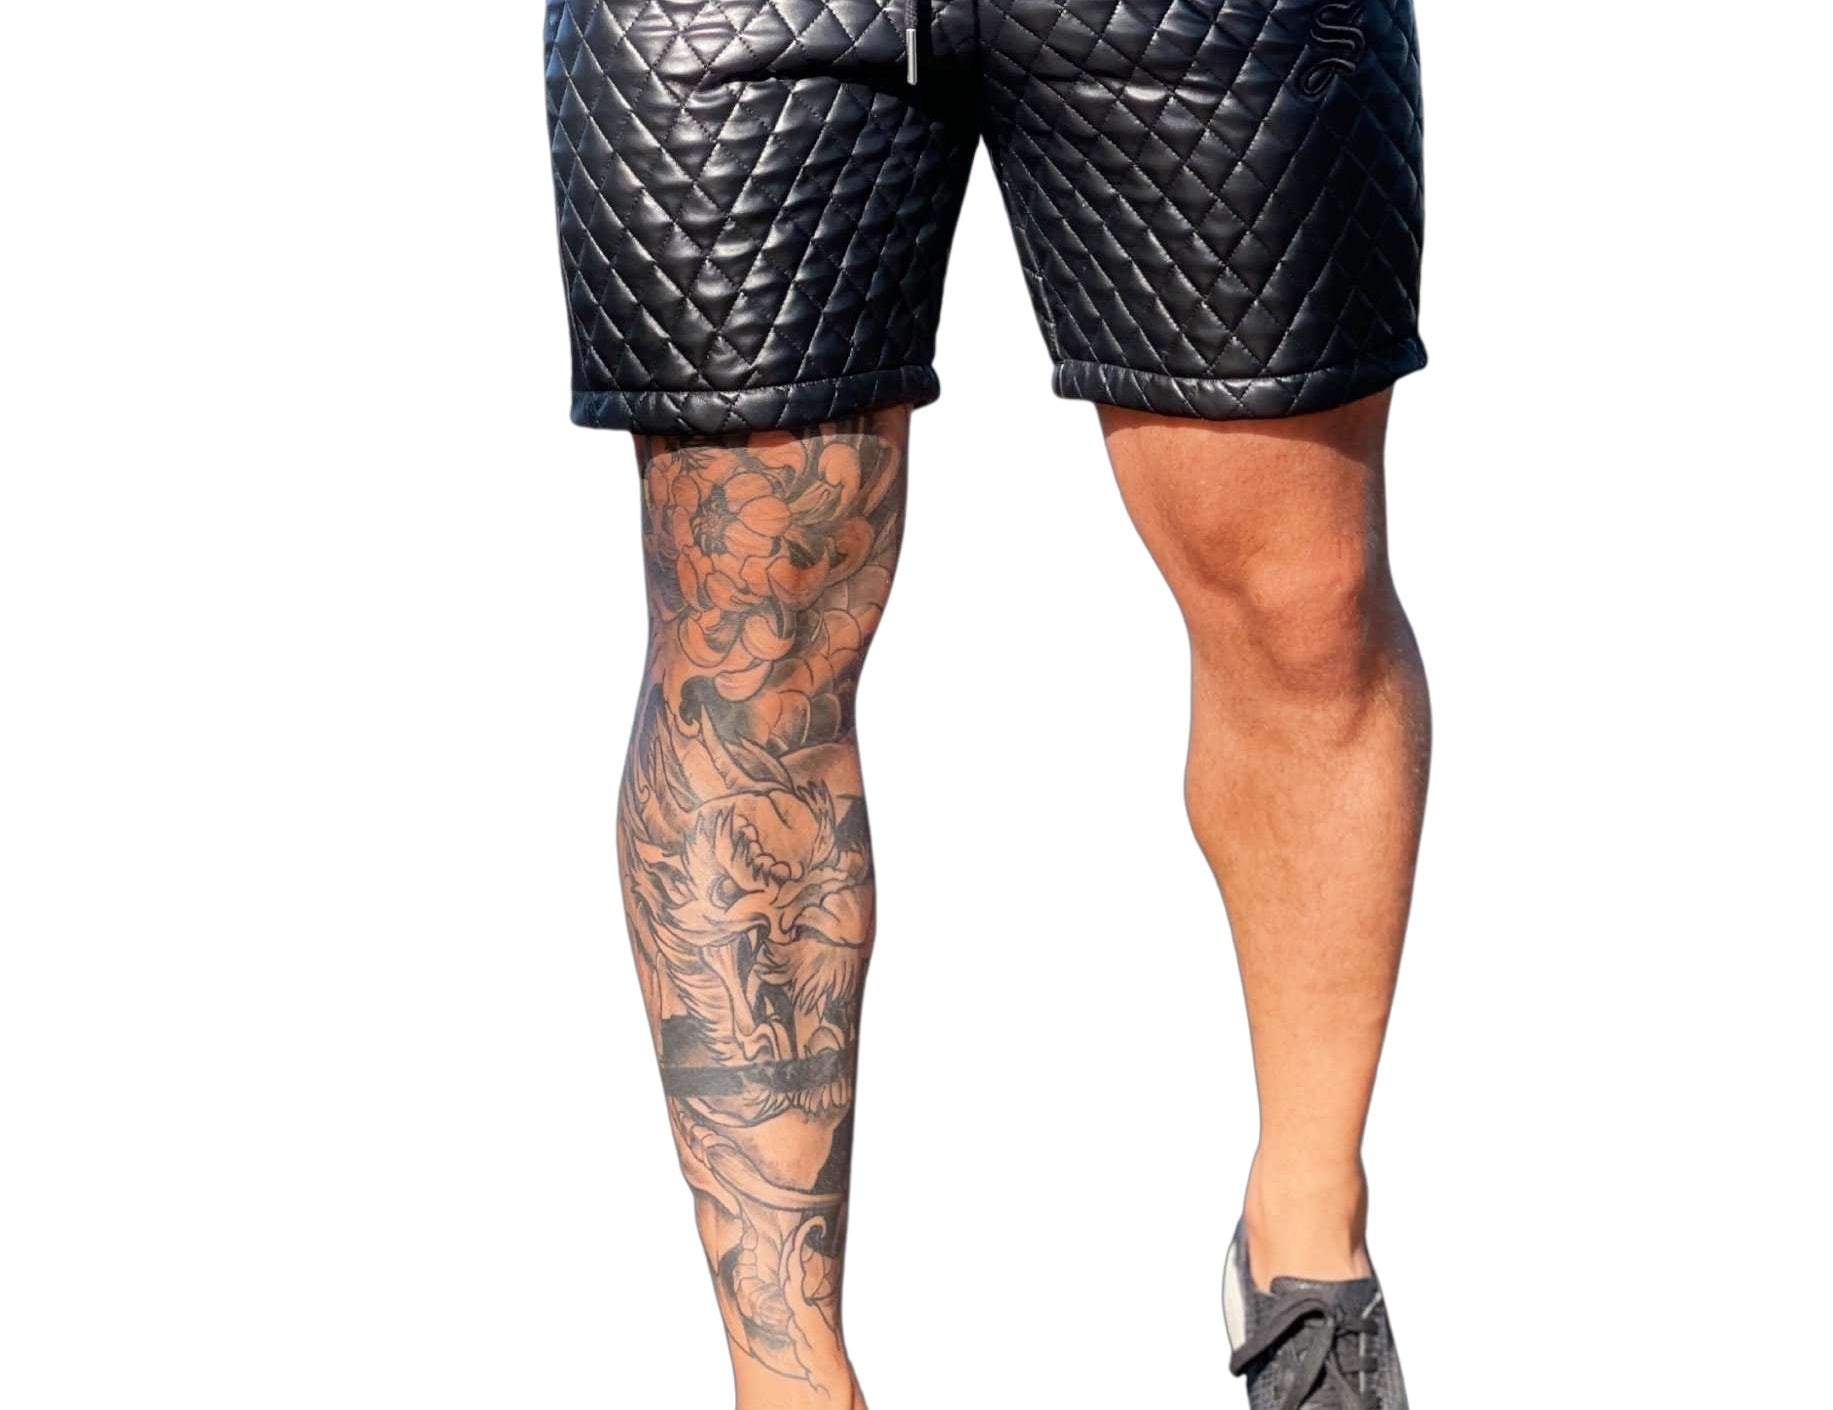 Horse Warrior - Black Shorts for Men (PRE-ORDER DISPATCH DATE 1 JULY 2022) - Sarman Fashion - Wholesale Clothing Fashion Brand for Men from Canada